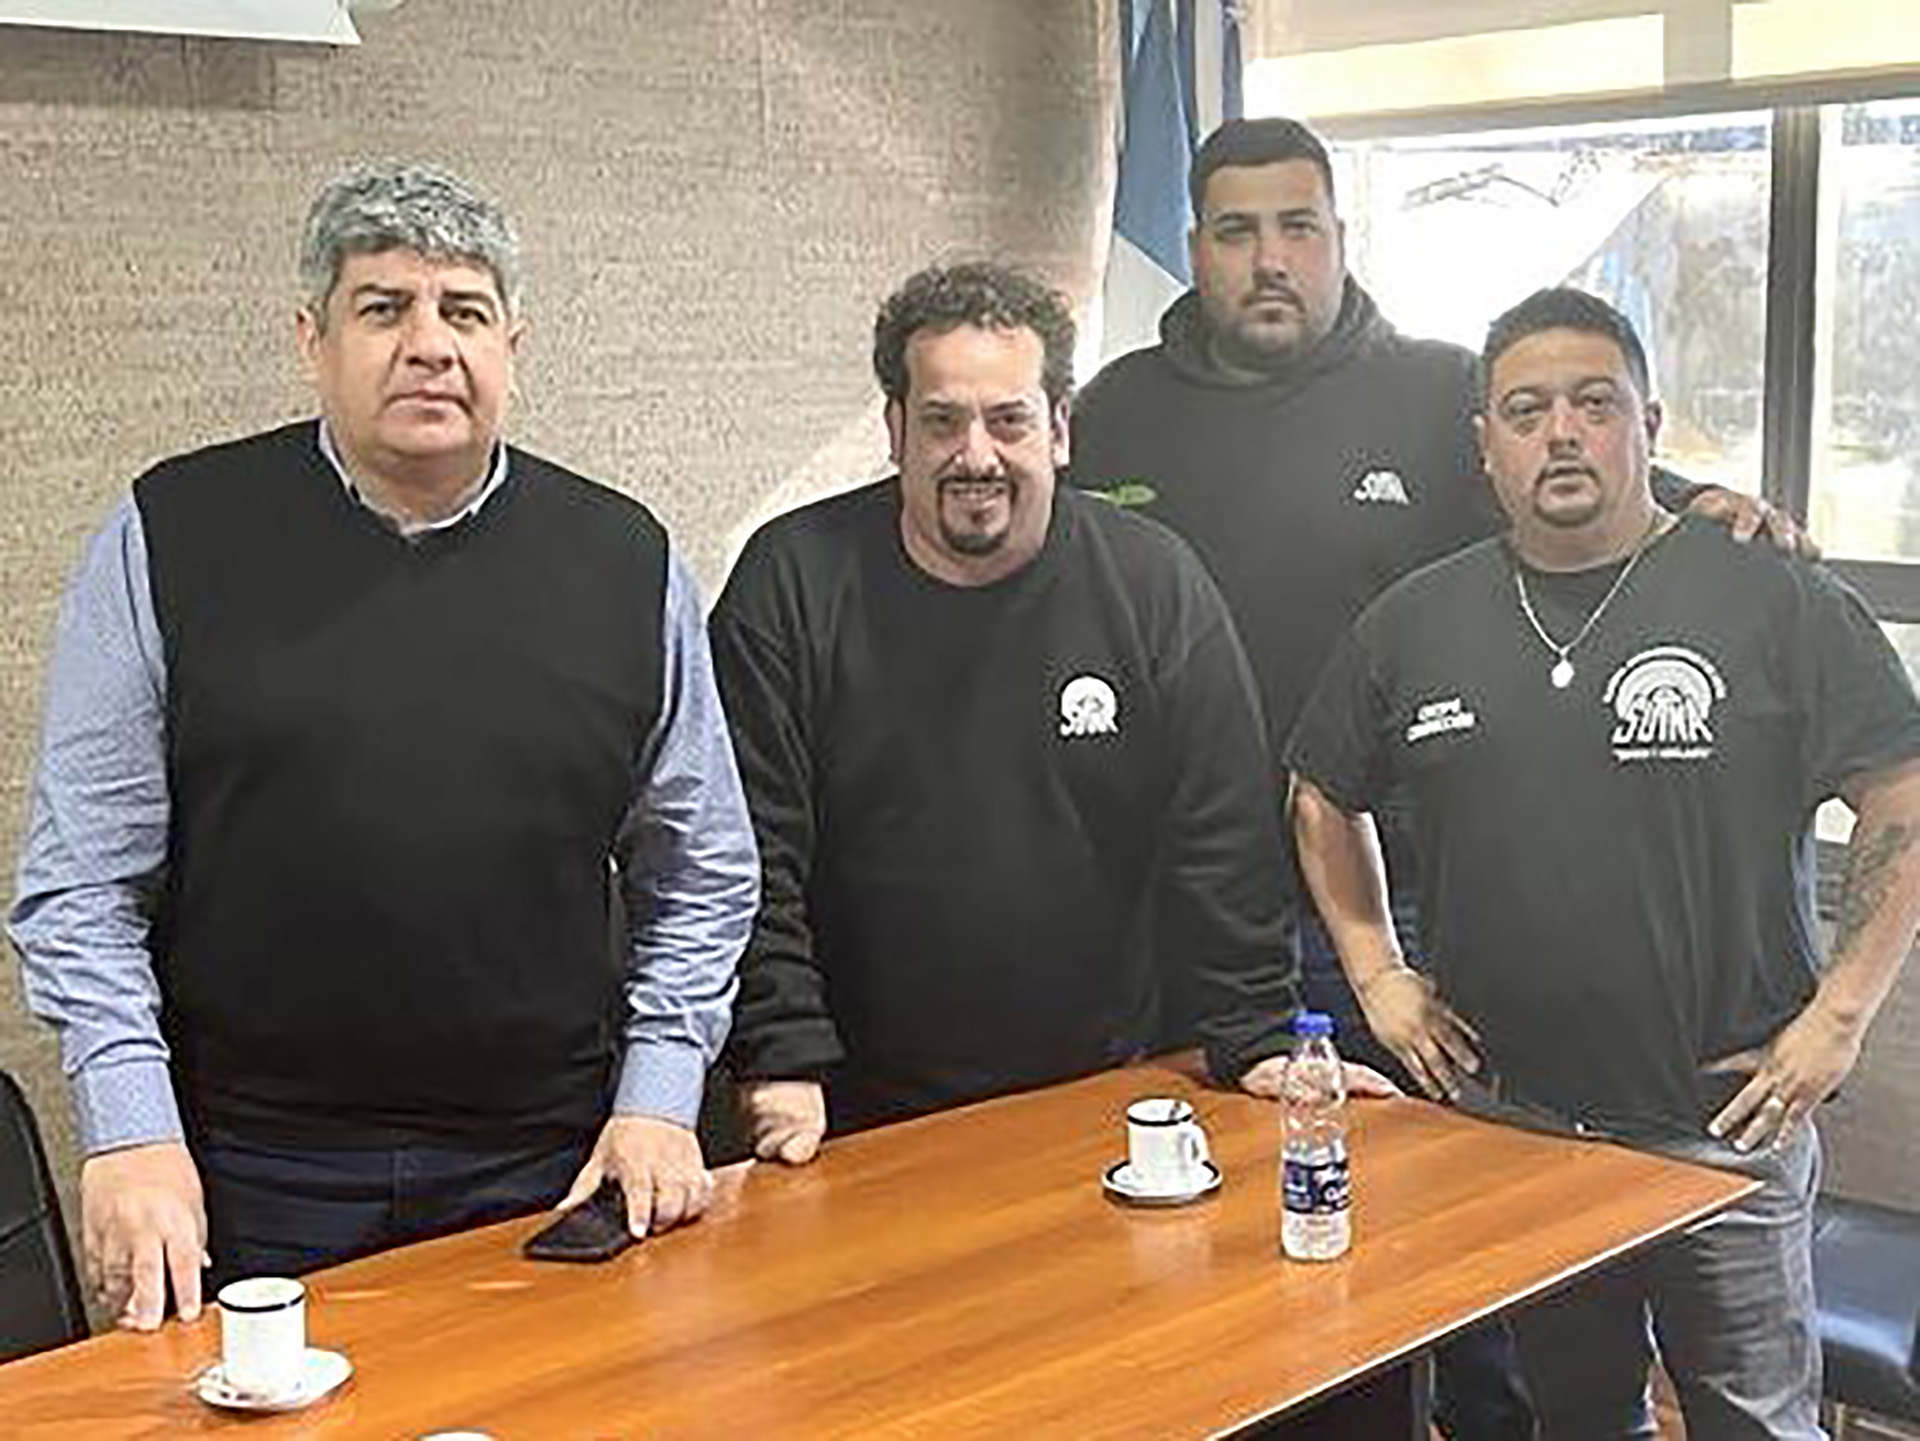 Crespo, In The Center, Recently Received The Visit And Support Of Pablo Moyano From Truck Drivers